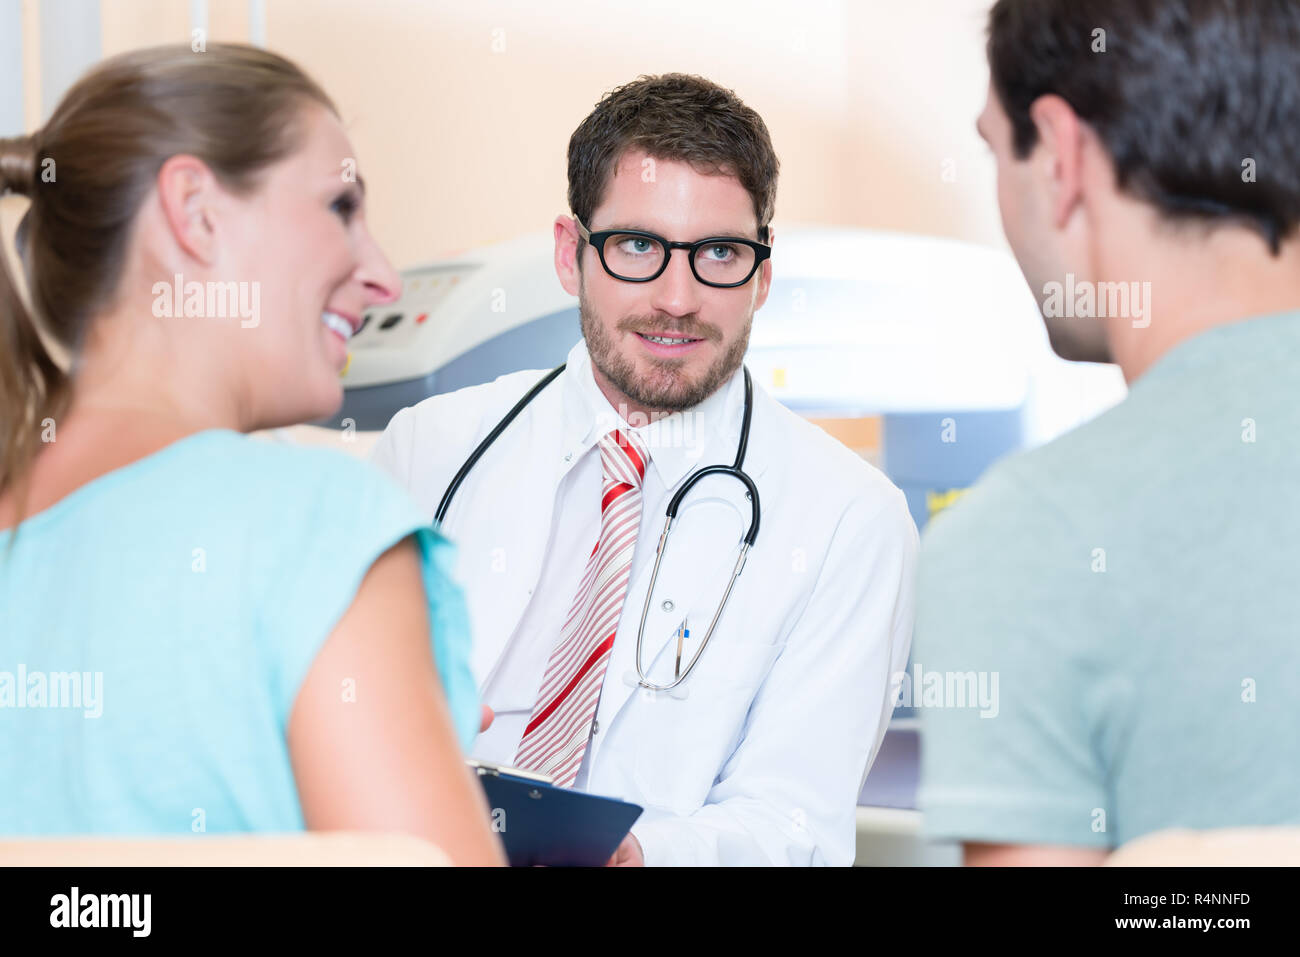 Pregnant woman and her partner seeing physician Stock Photo